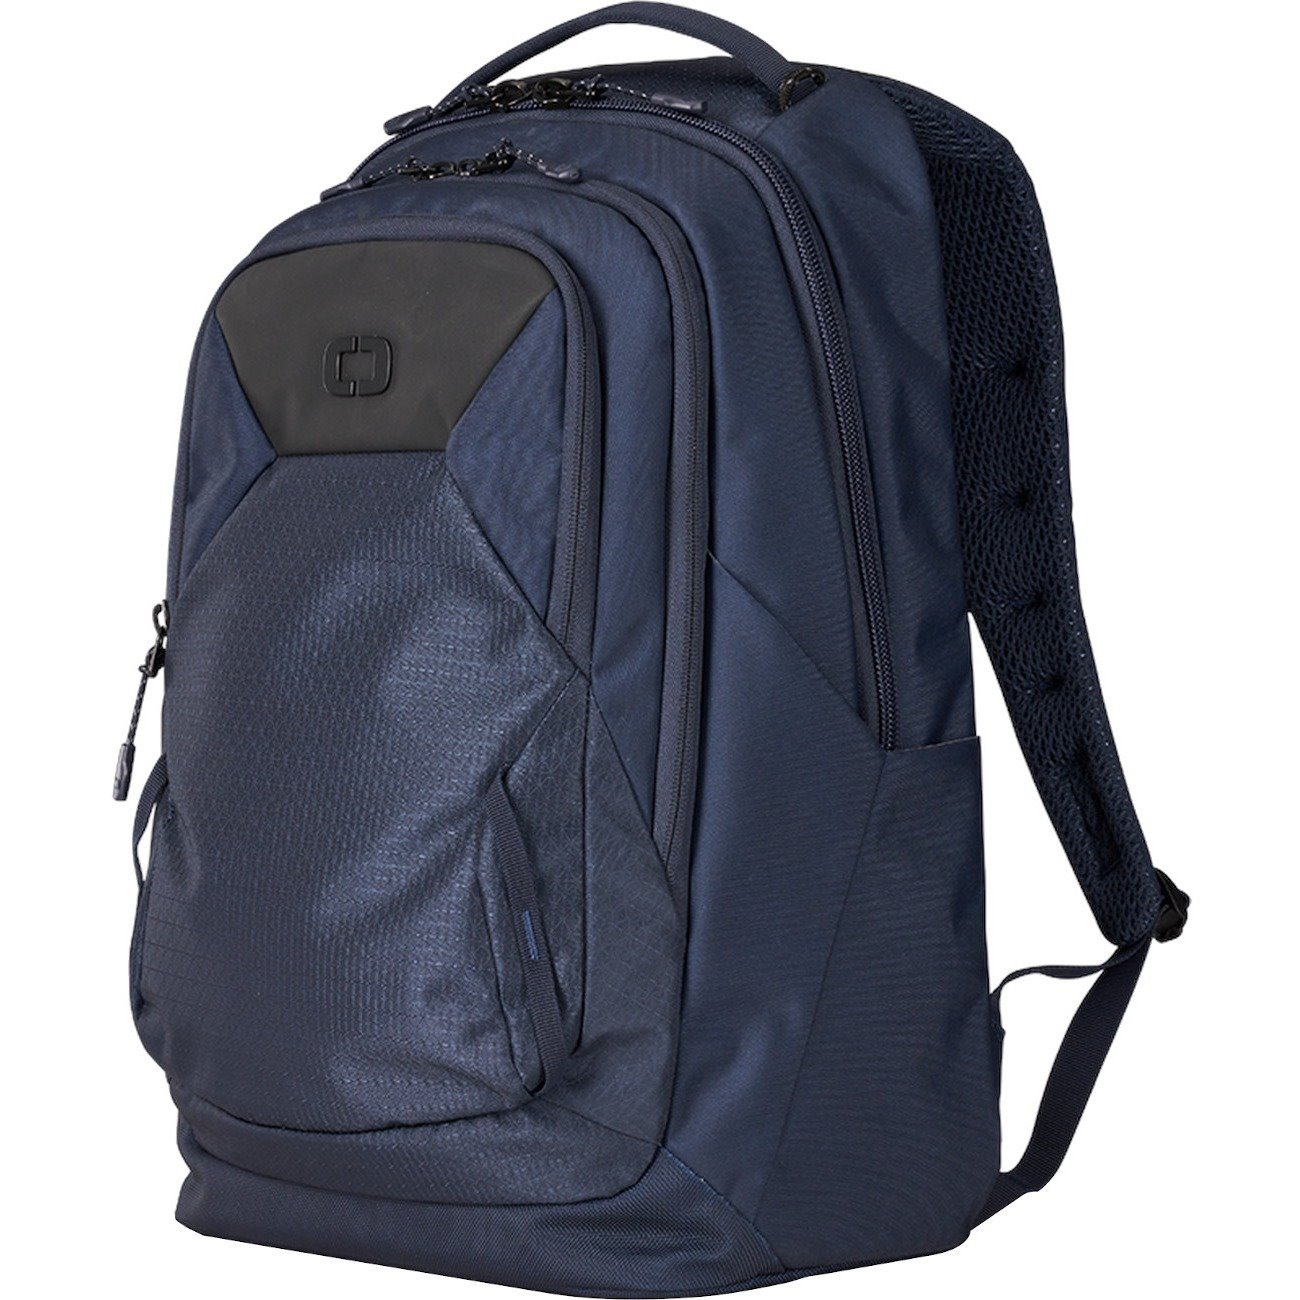 Ogio Axle Pro Carrying Case (Backpack) for 17" Notebook, Tablet, Travel Essential - Navy